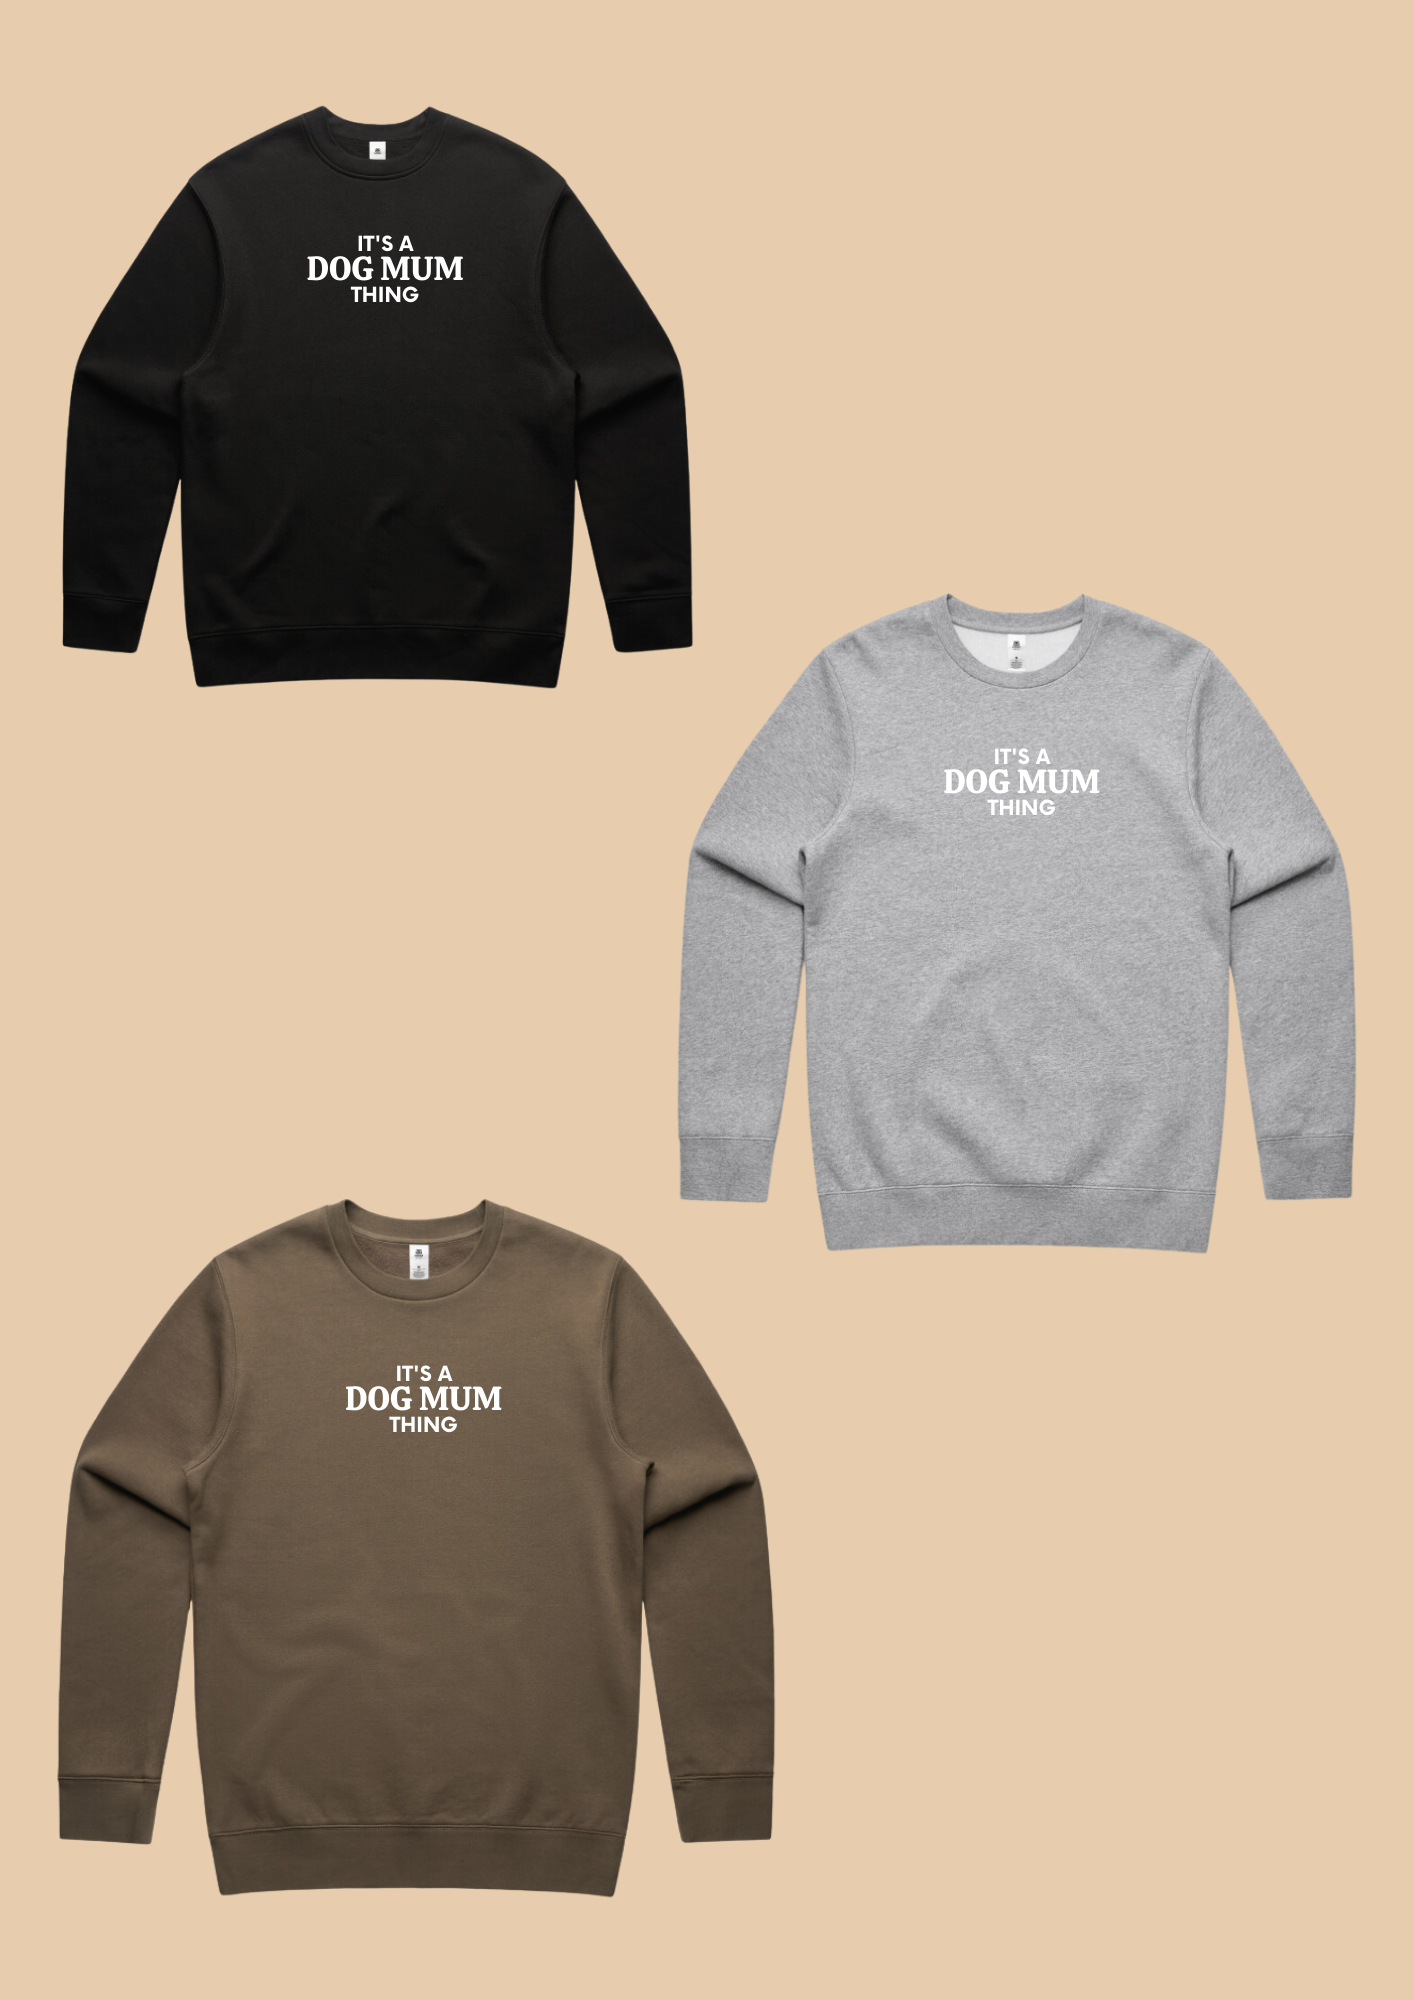 It's a Dog Mum Thing Crew Neck | PRE-ORDER